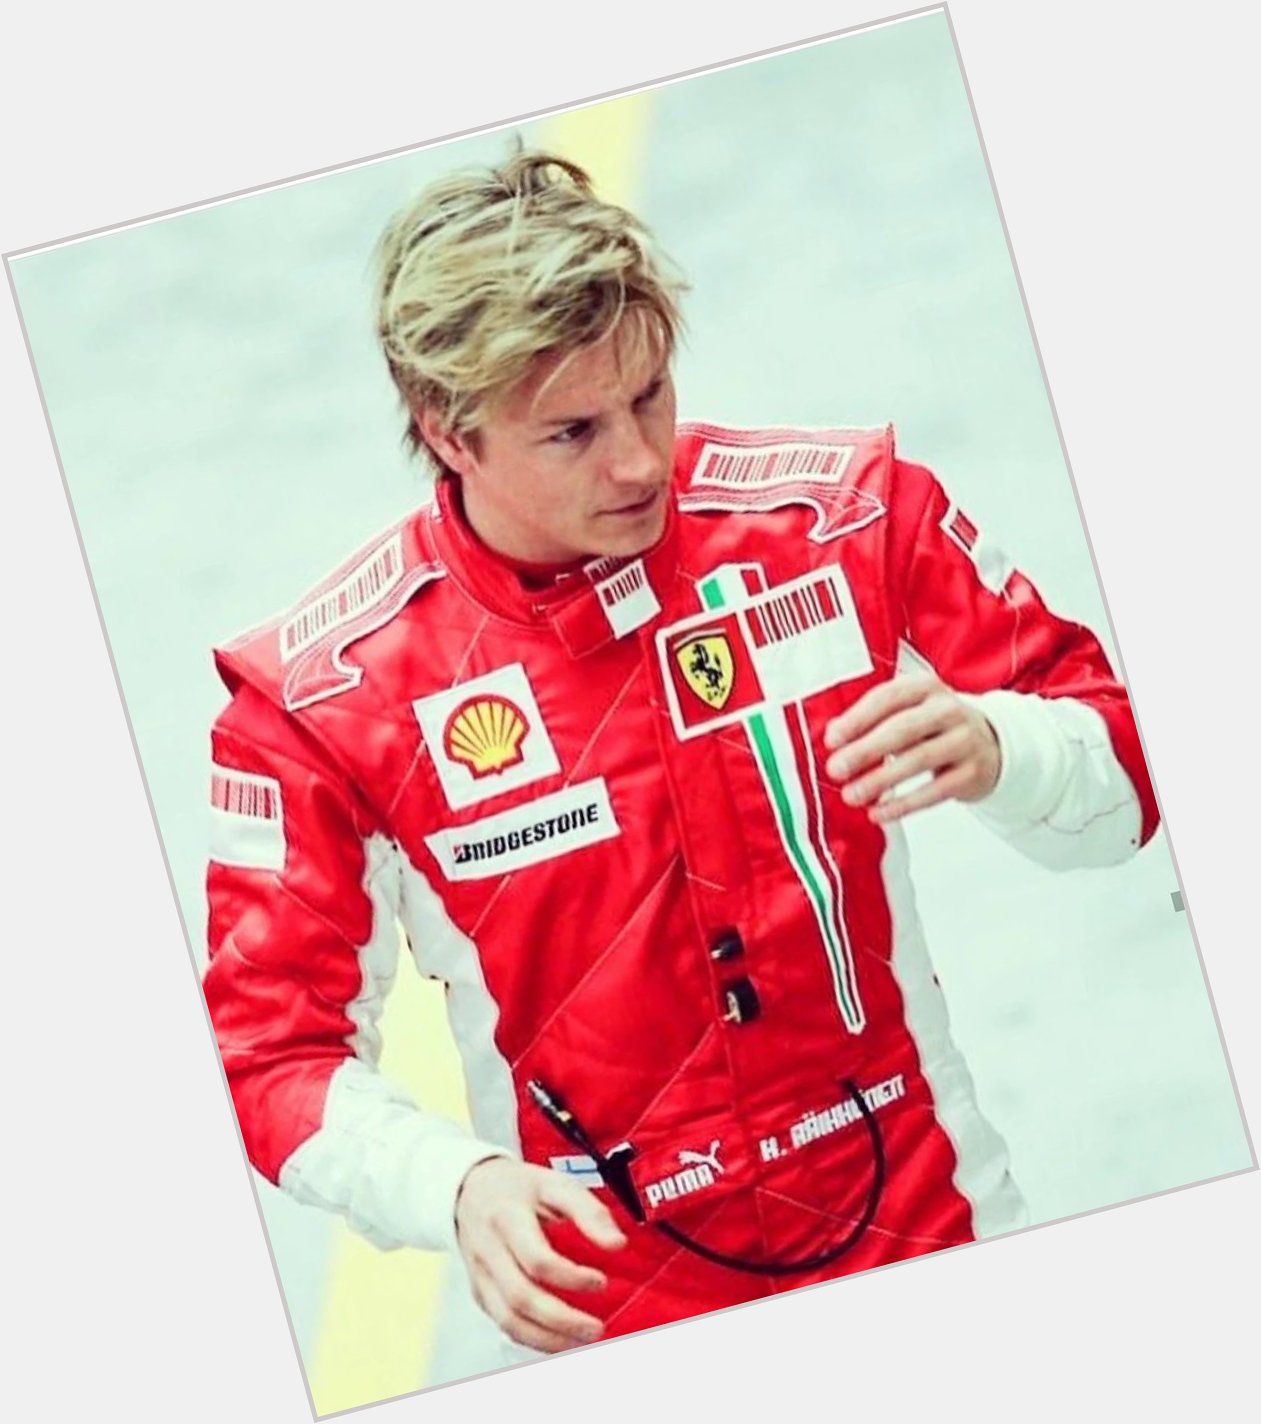 Happy Birthday to Kimi Raikkonen!

Here\s some pictures of him to bright up your day (little tread) 